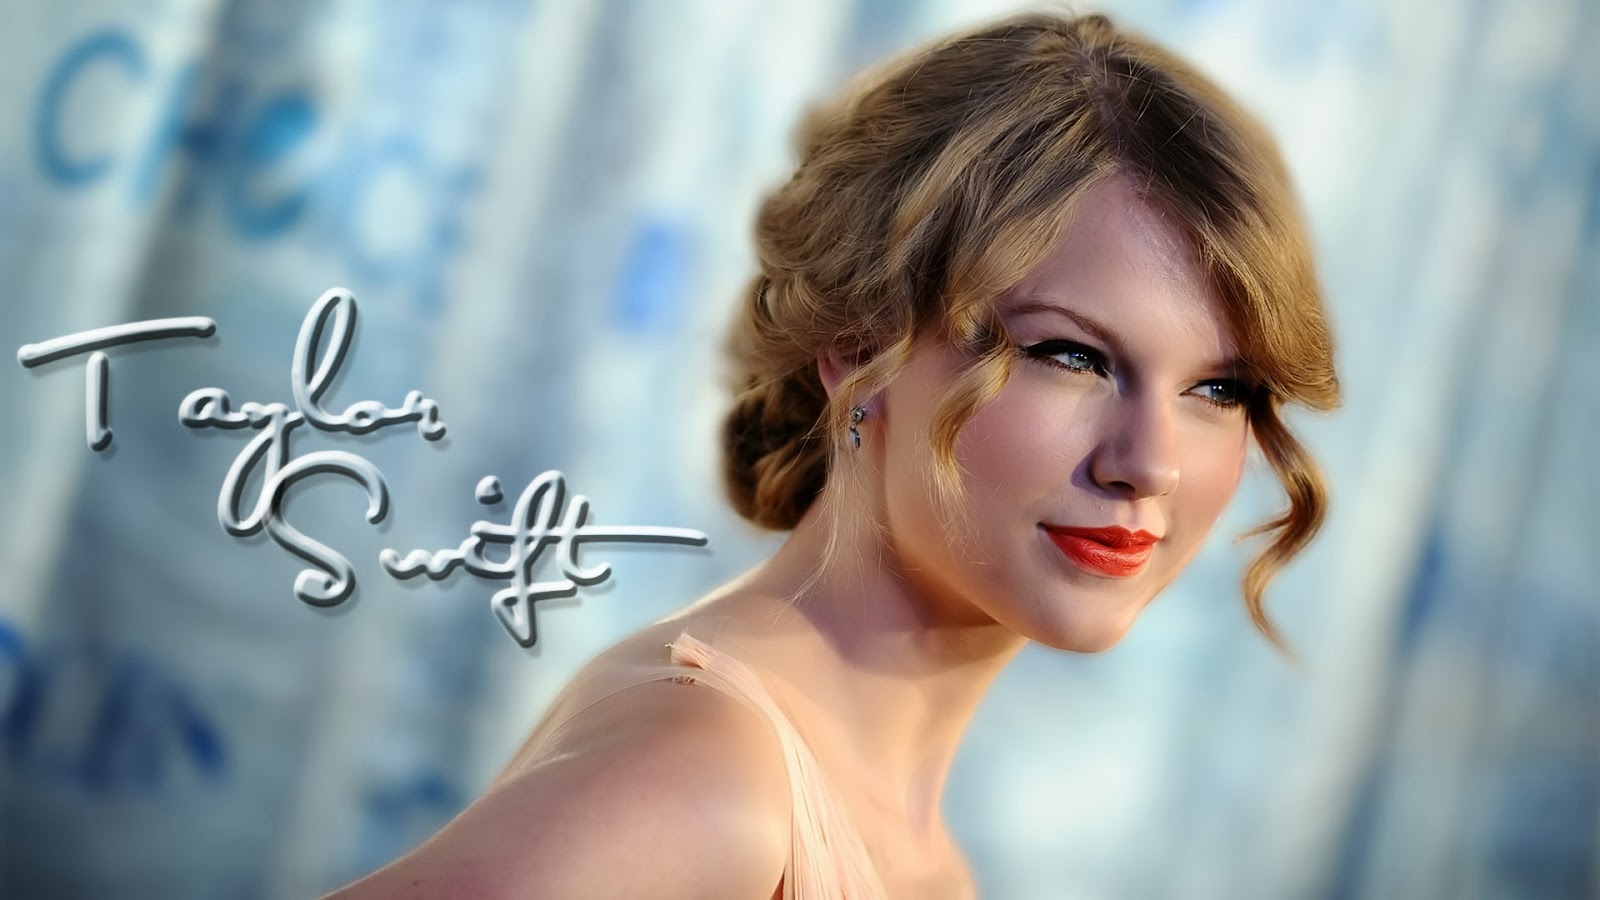 WallPapers: Free Download 1080 Hd Taylor-Swift Wallpapers